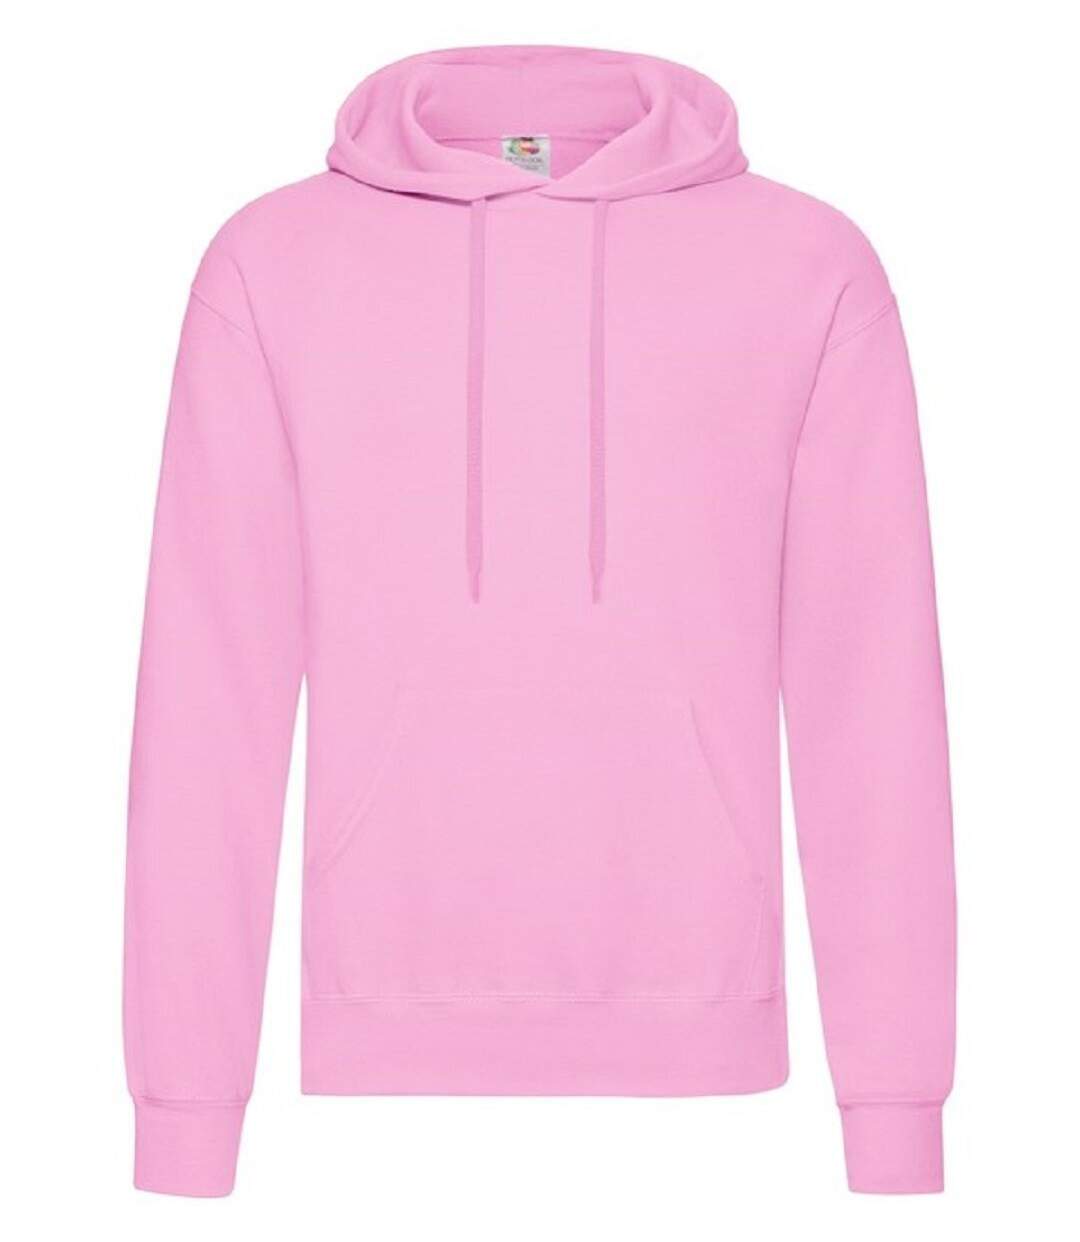 Sweat-shirt - Homme - 62-208-0 - rose clair